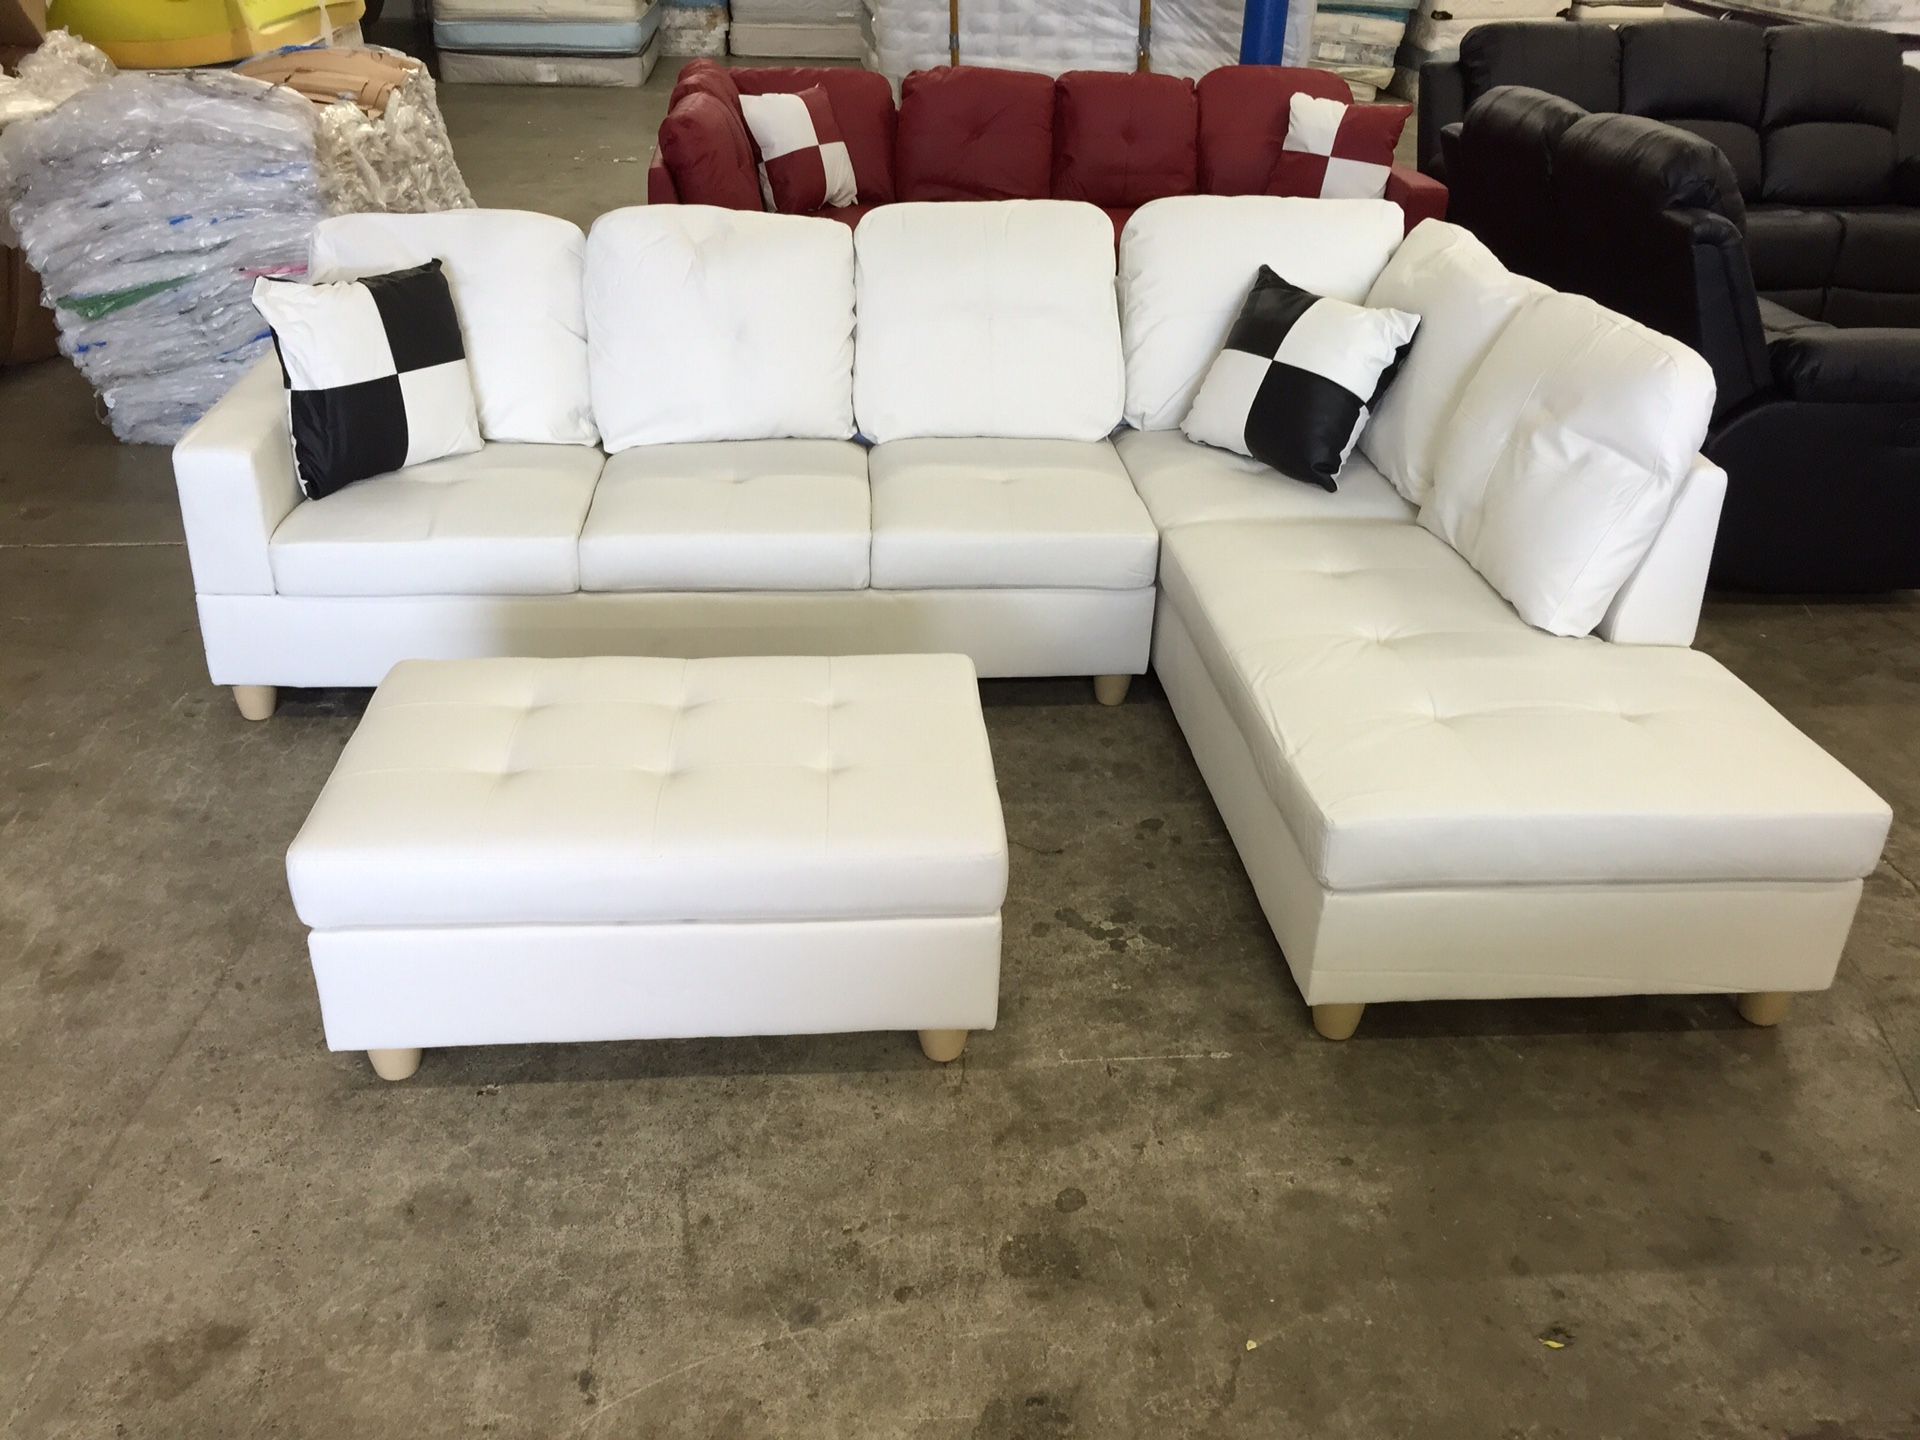 White leather sectional couch and storage ottoman